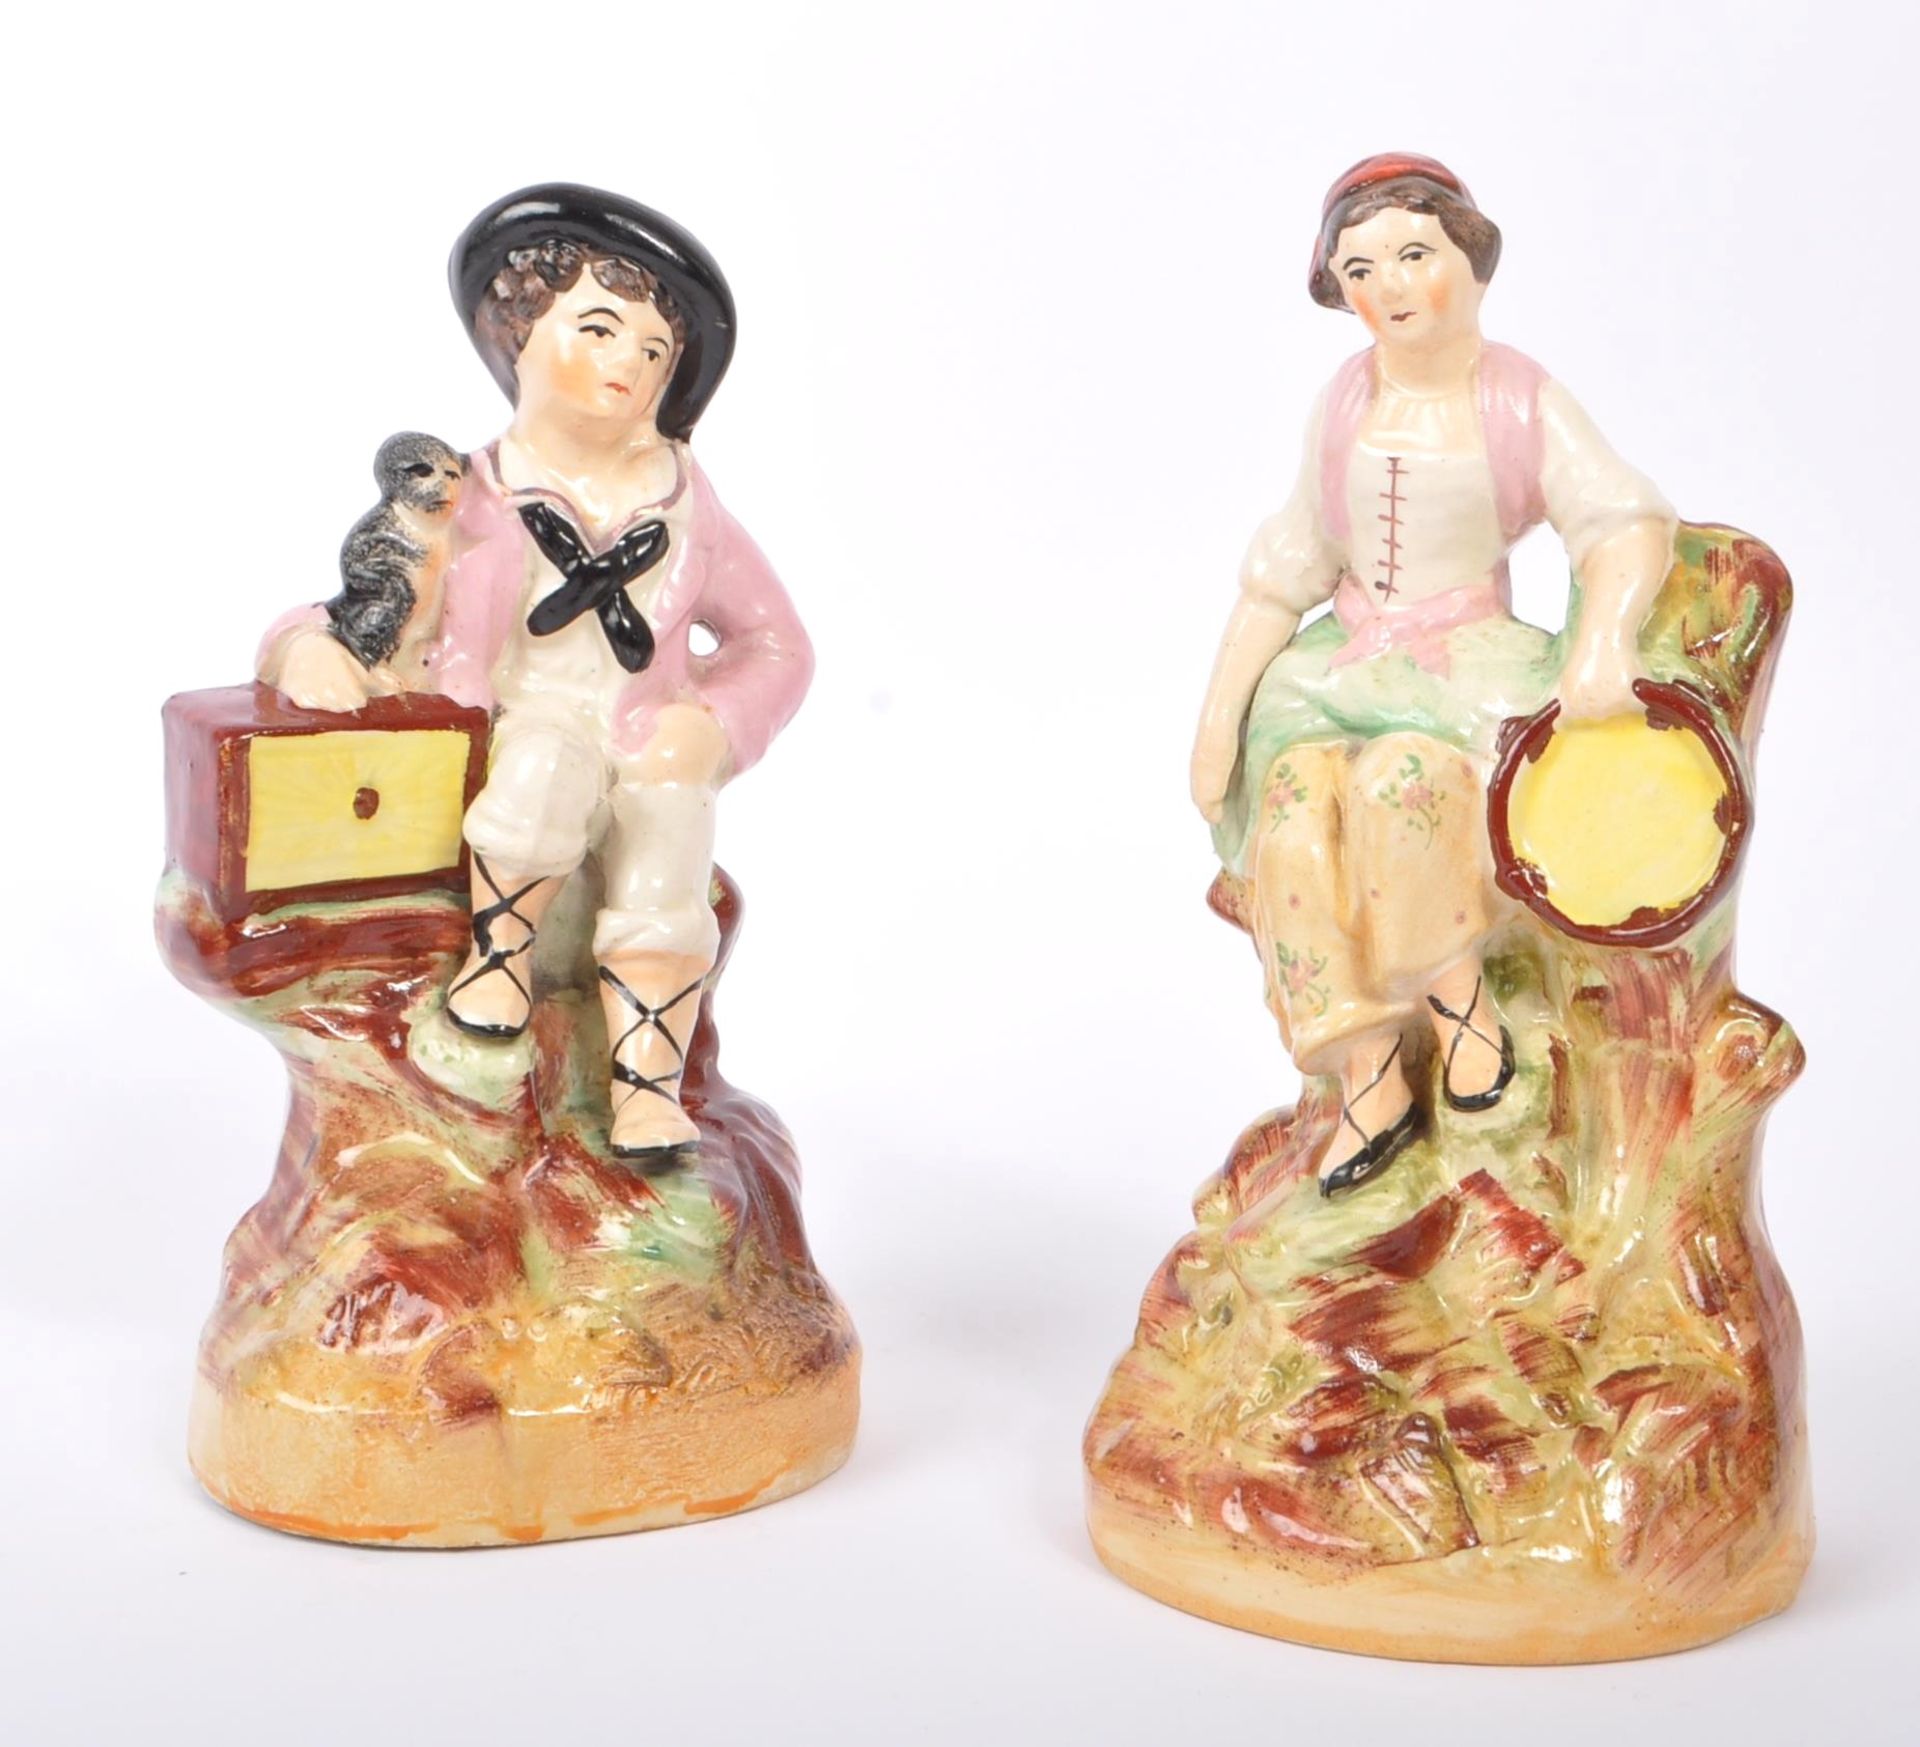 PAIR OF 19TH CENTURY VICTORIAN STAFFORDSHIRE FIGURES